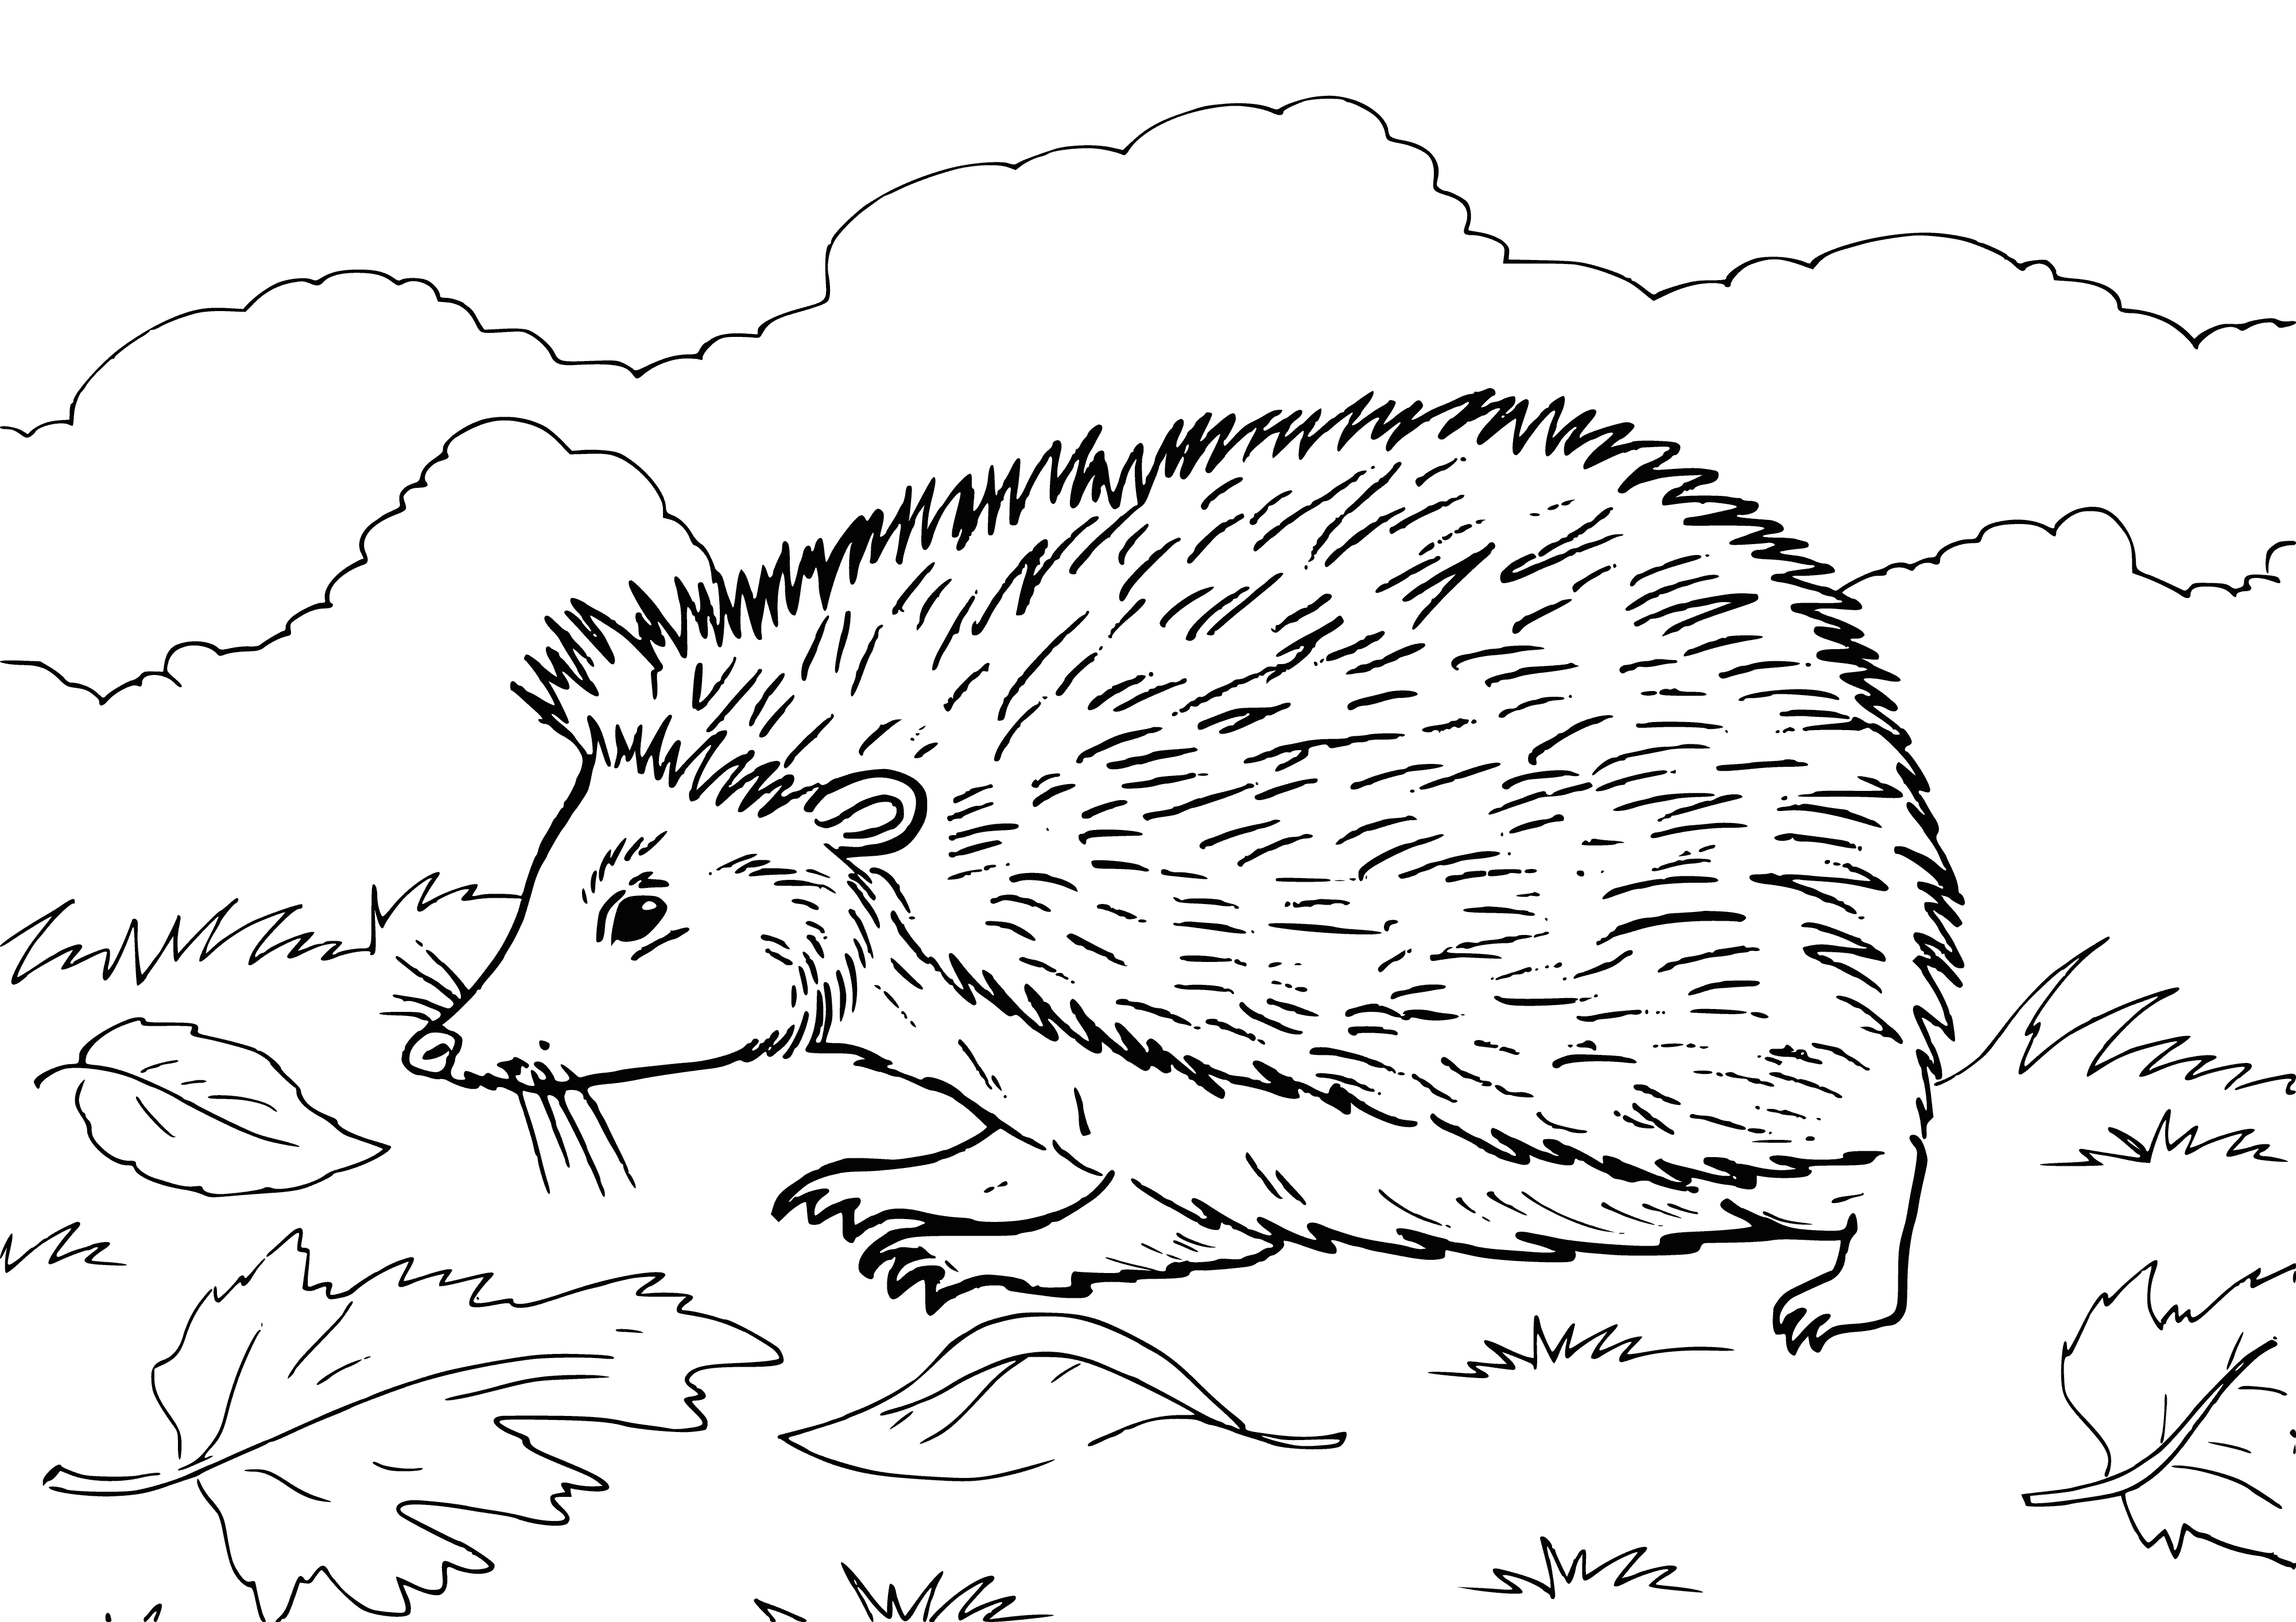 coloring page: Adorable hedgehog eating a caterpillar on a coloring page! Brown/white fur, short snout, black eyes, white belly, & back/legs covered in spines.